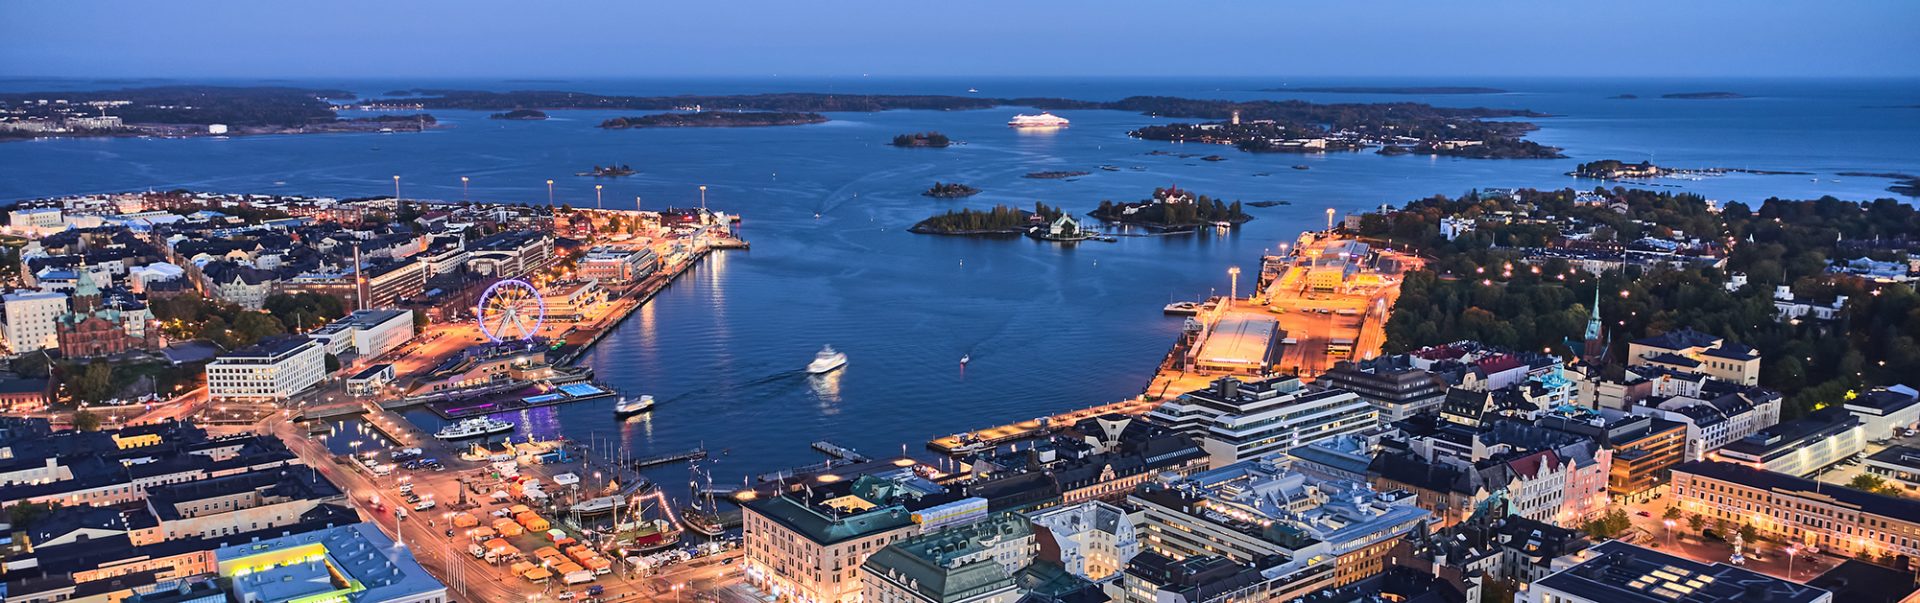 Aerial view of Helsinki Port in the autumn evening, Finland.